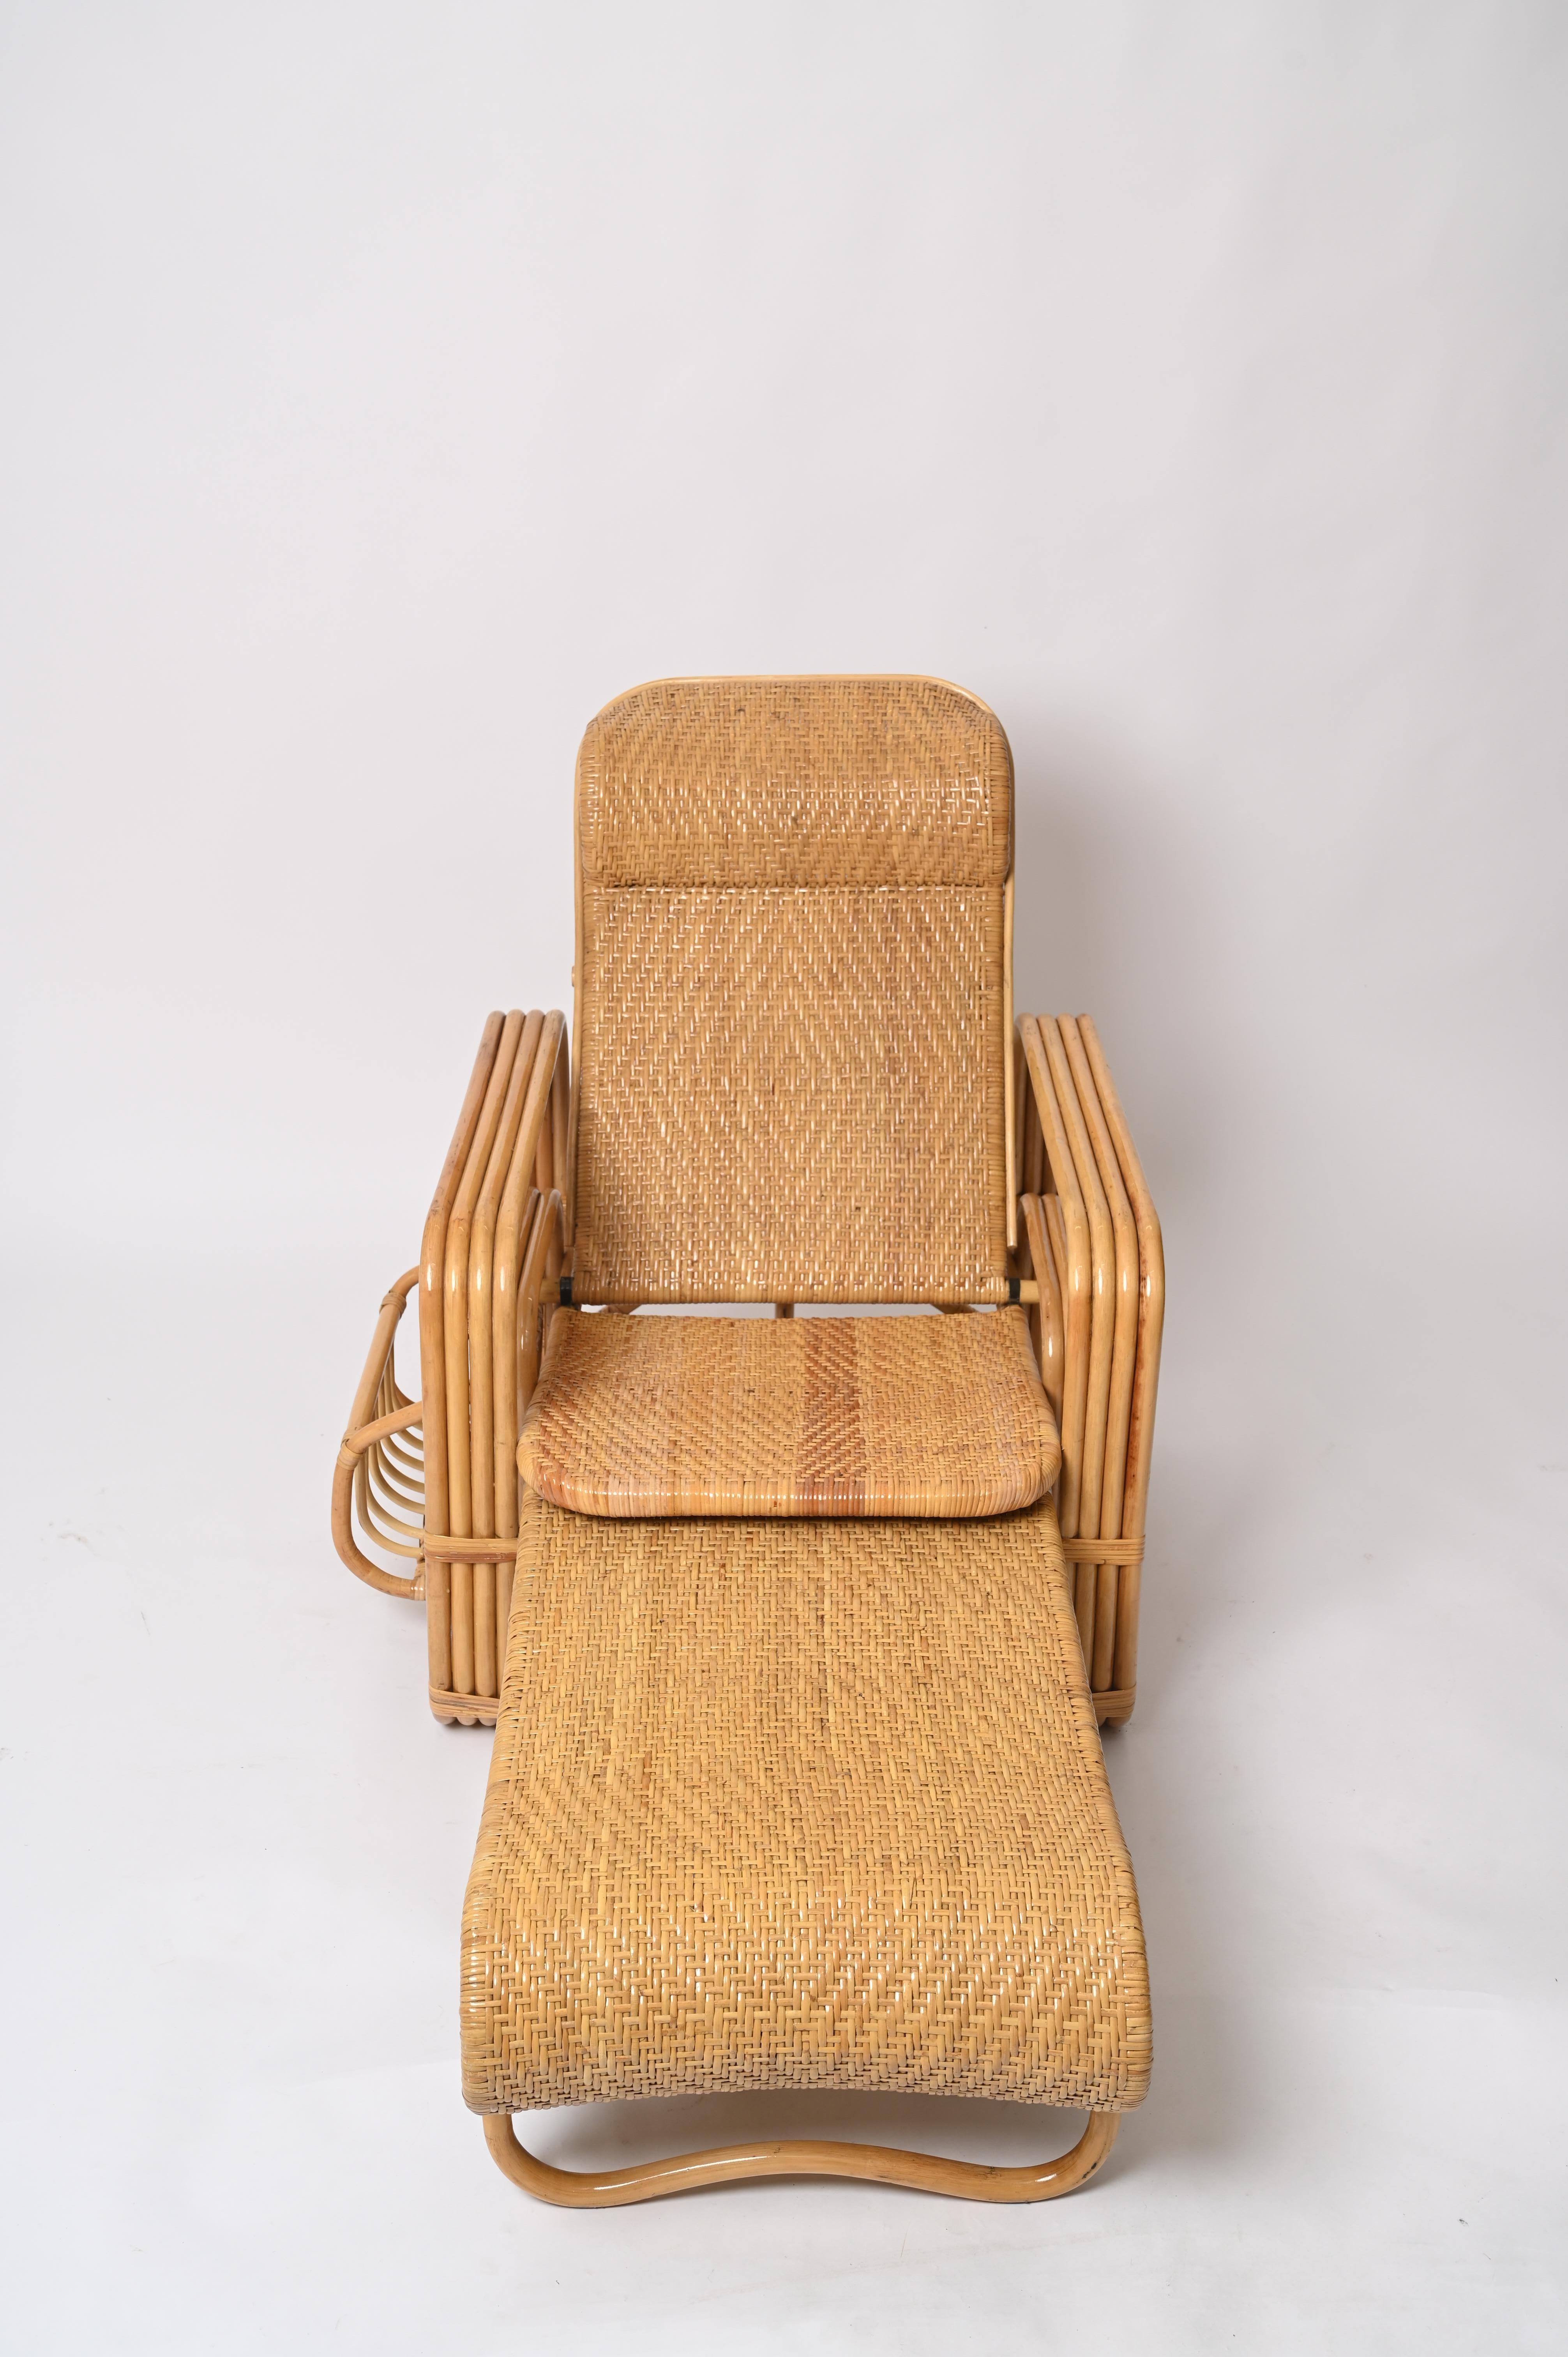 Adjustable Chaise Longue / Lounge Chair in Woven Wicker and Rattan, Italy 1970s  For Sale 6